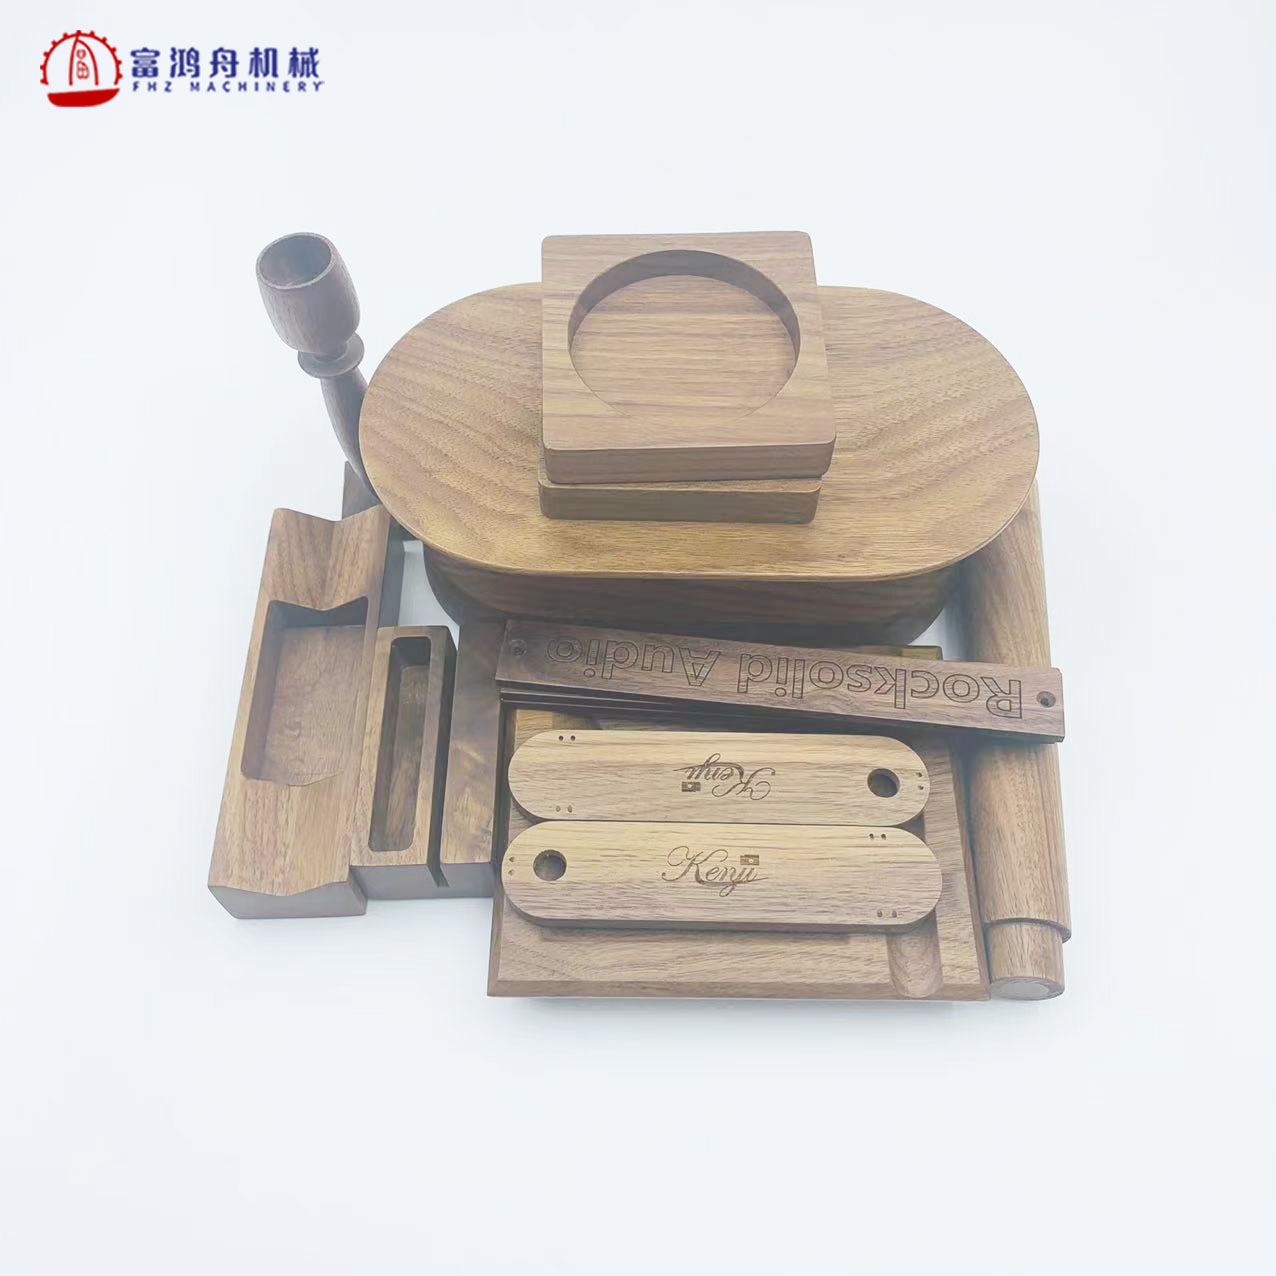 Custom Wooden Part Engraving Solid Wood Crafts By Wood Parts Machining For Uk Usa Canada Market